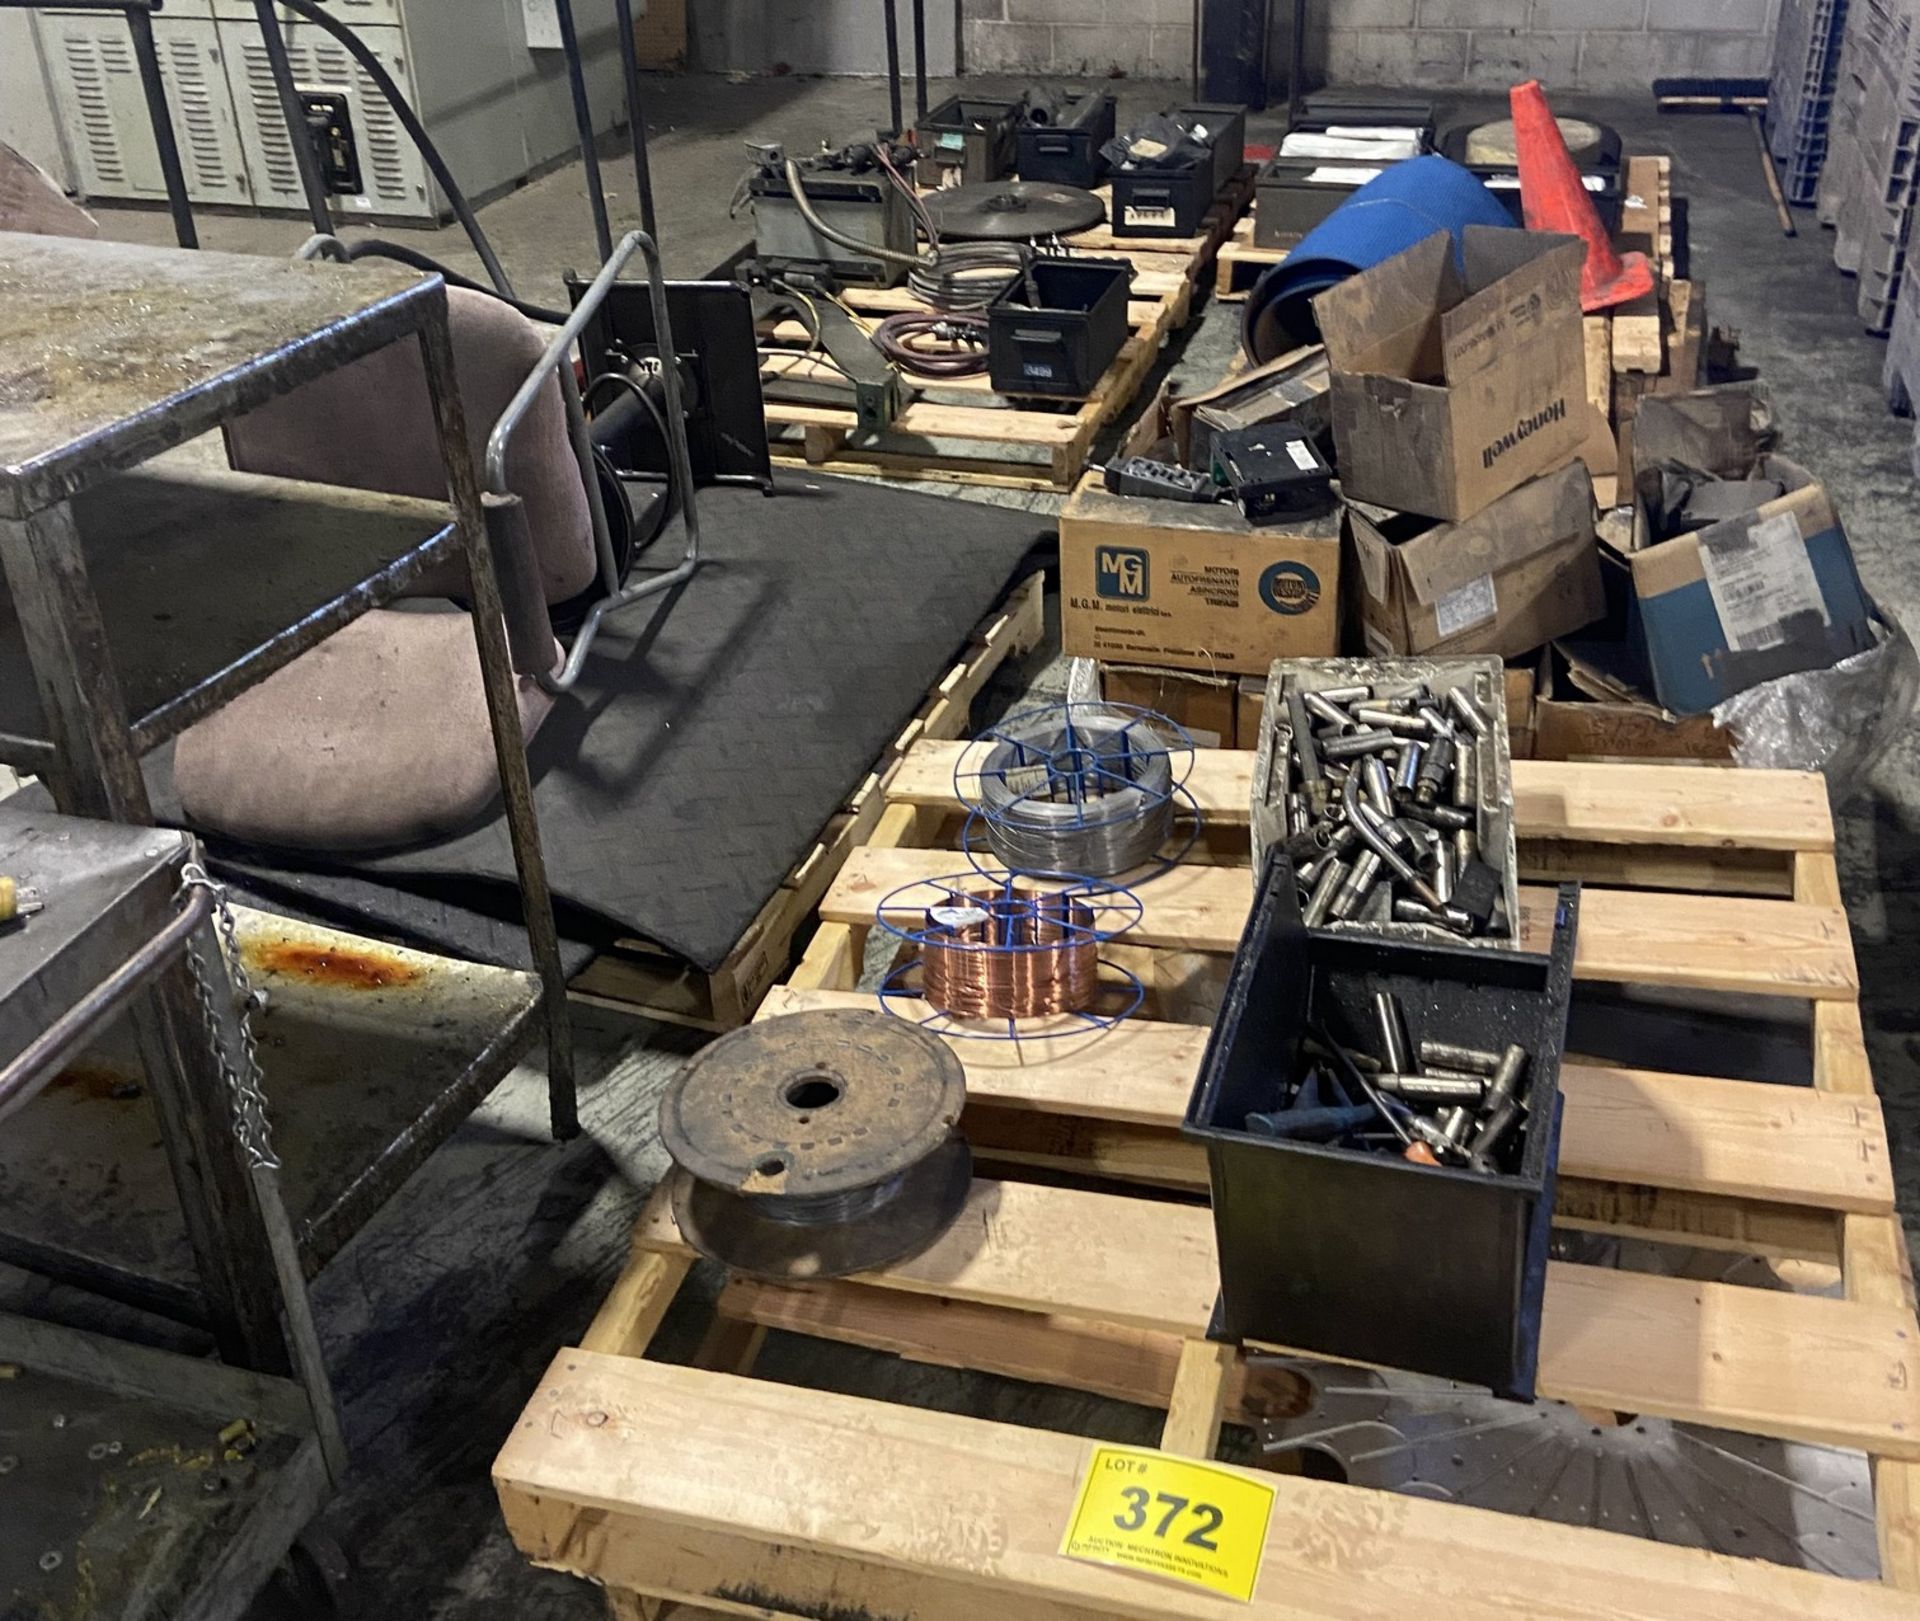 LOT (7) PALLETS OF ASSORTED TOOLING, ELECTRIC MOTORS, WELDING WIRE, FILTERS, CONTROL VALVES, CHAIN